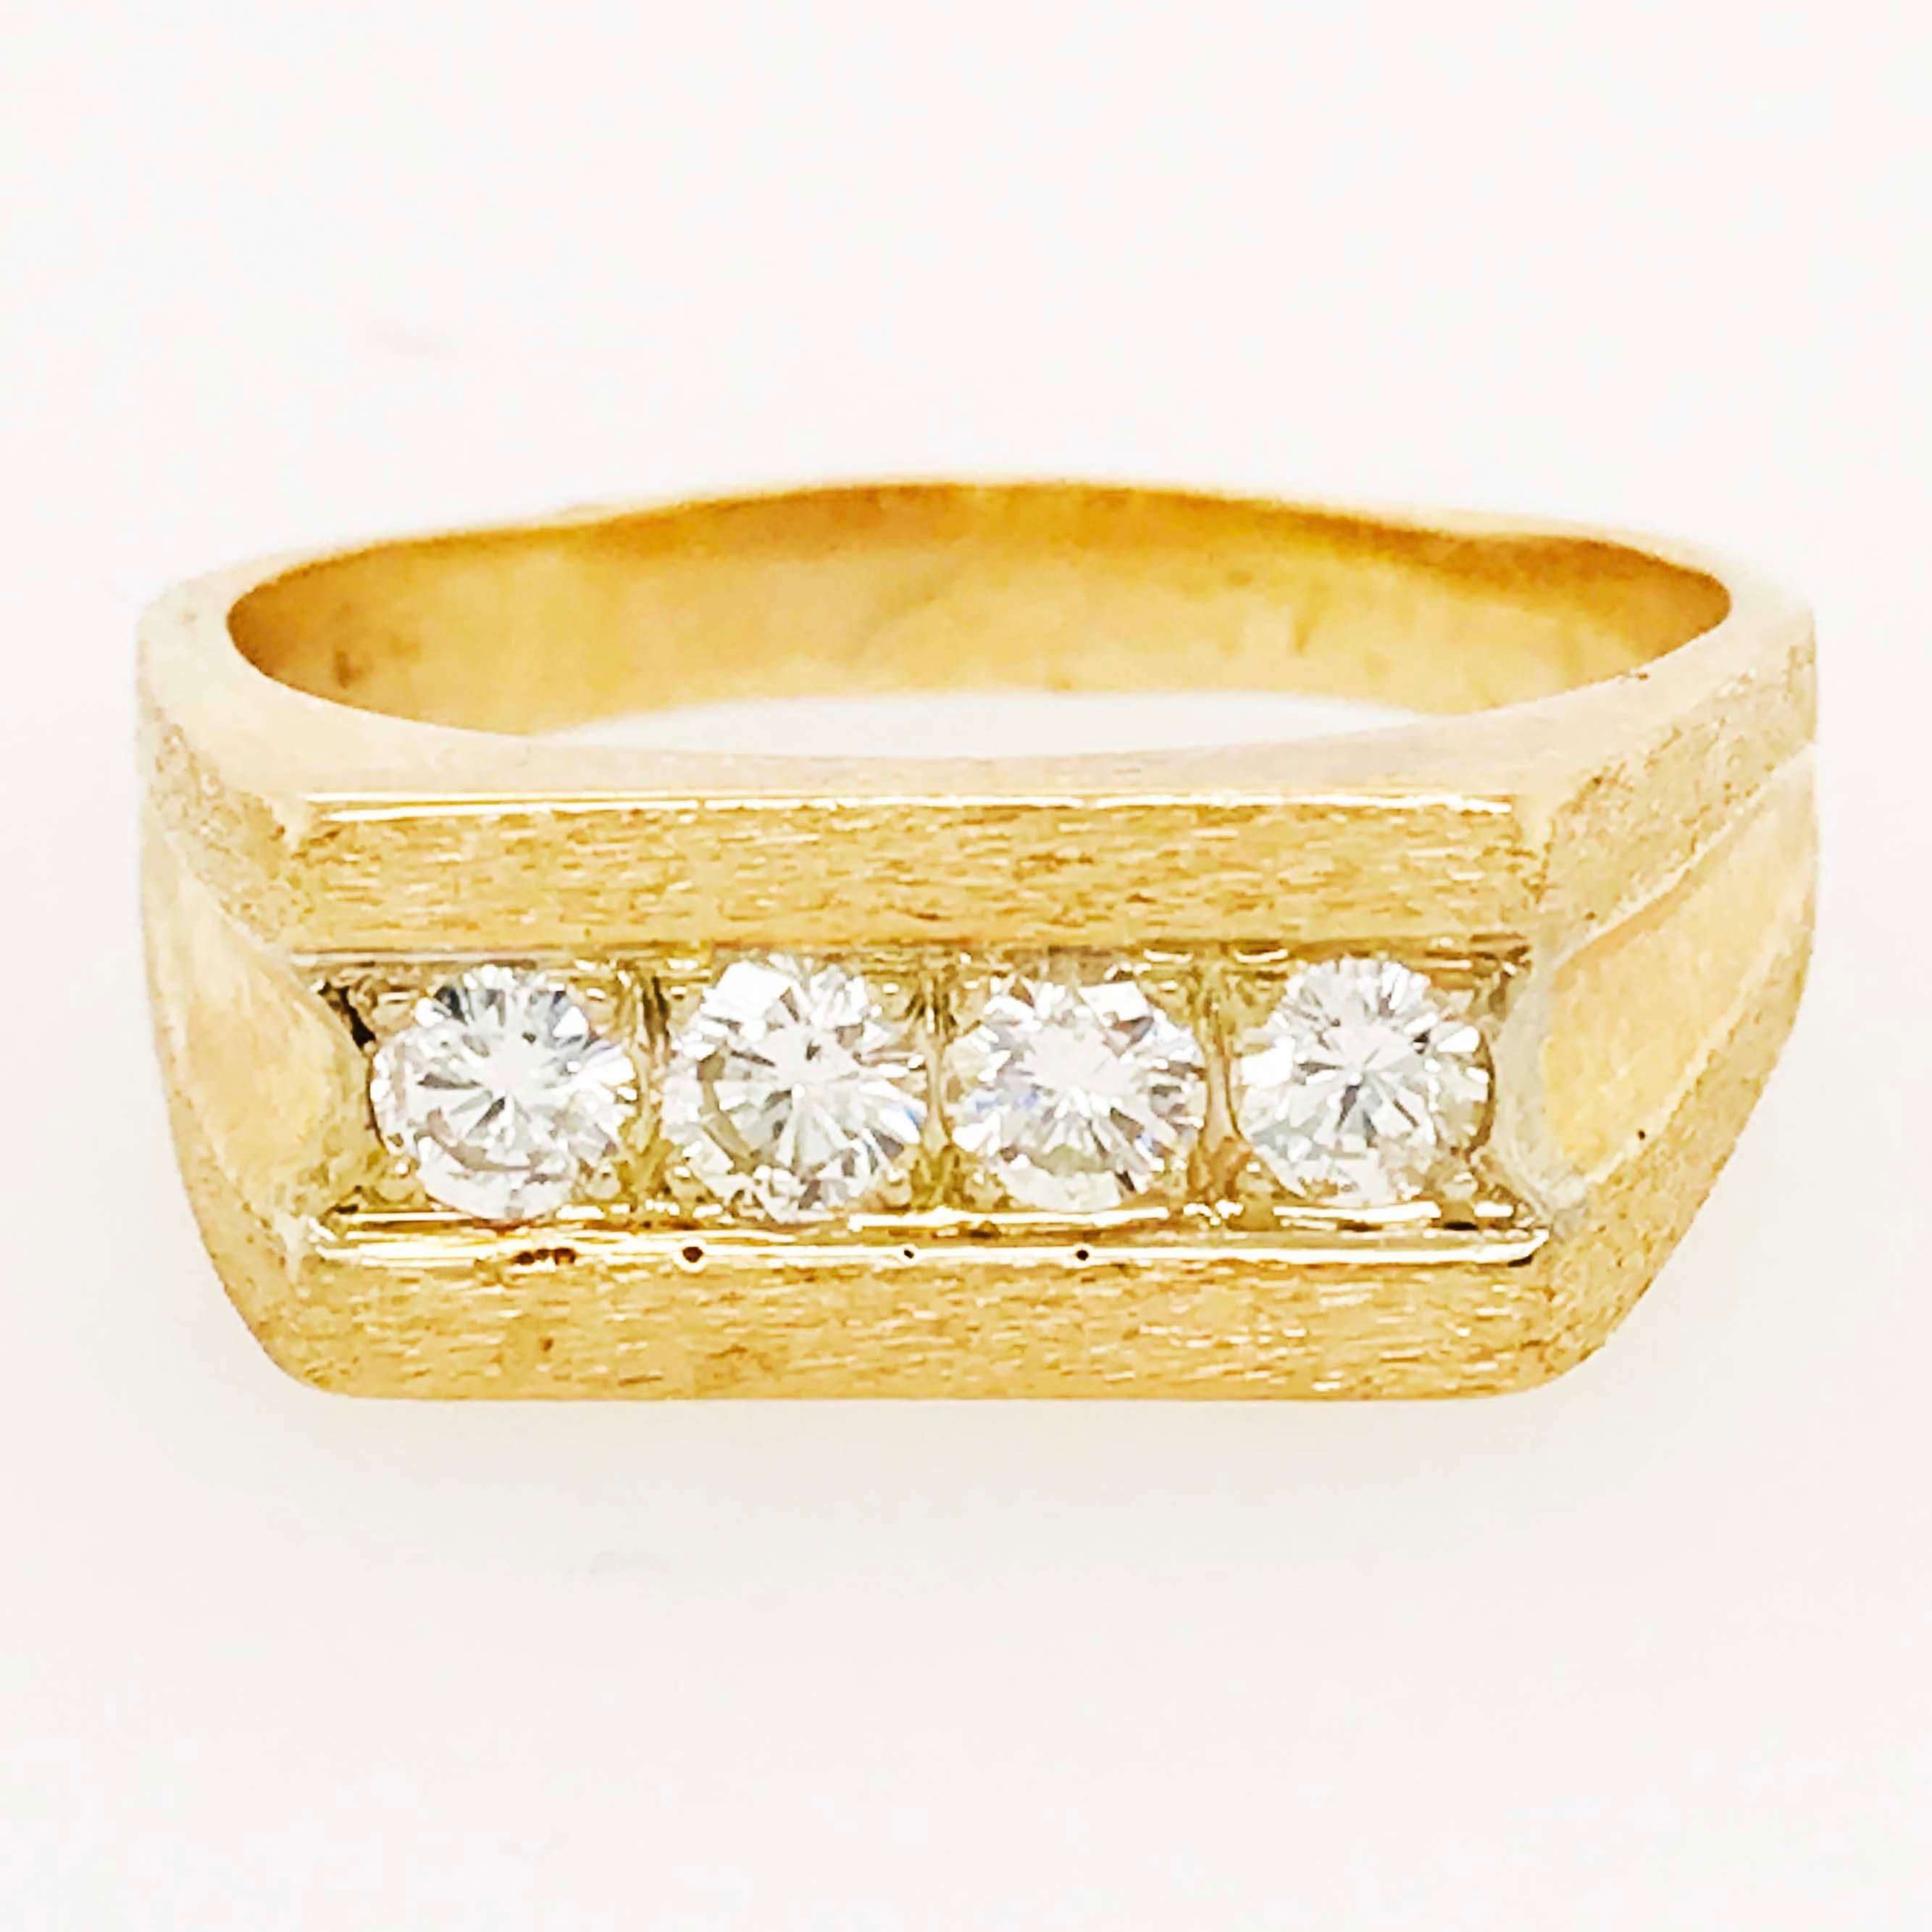 The custom diamond band is a man's wedding band with genuine, natural round brilliant diamonds! The diamonds are bright white and look amazing in the 14 karat yellow gold setting. The top of the ring is a squared-off shape with the round brilliant